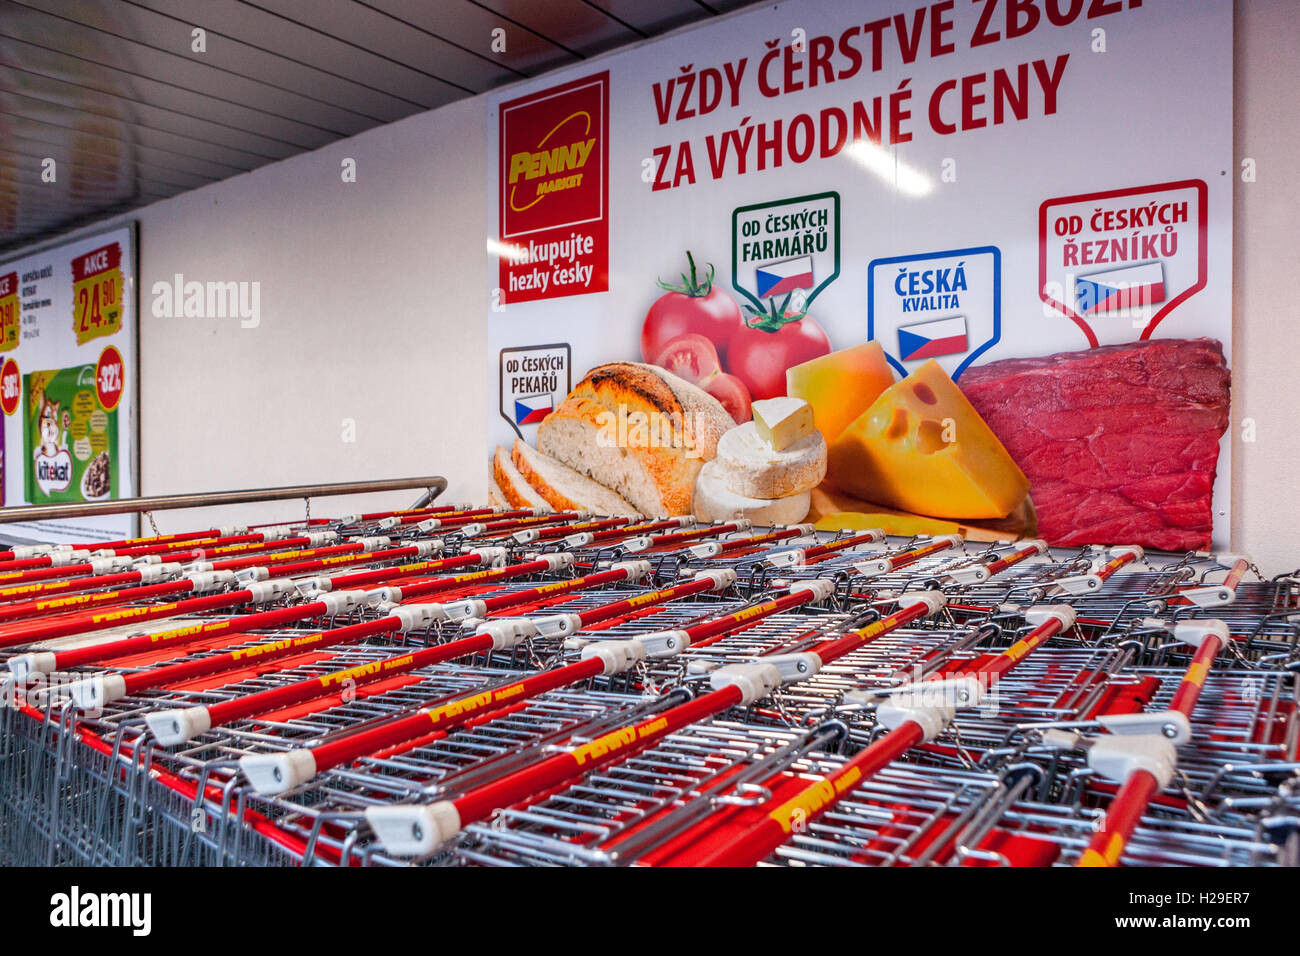 Shopping trolleys, carts for a Penny Market supermarket Czech Republic Stock Photo